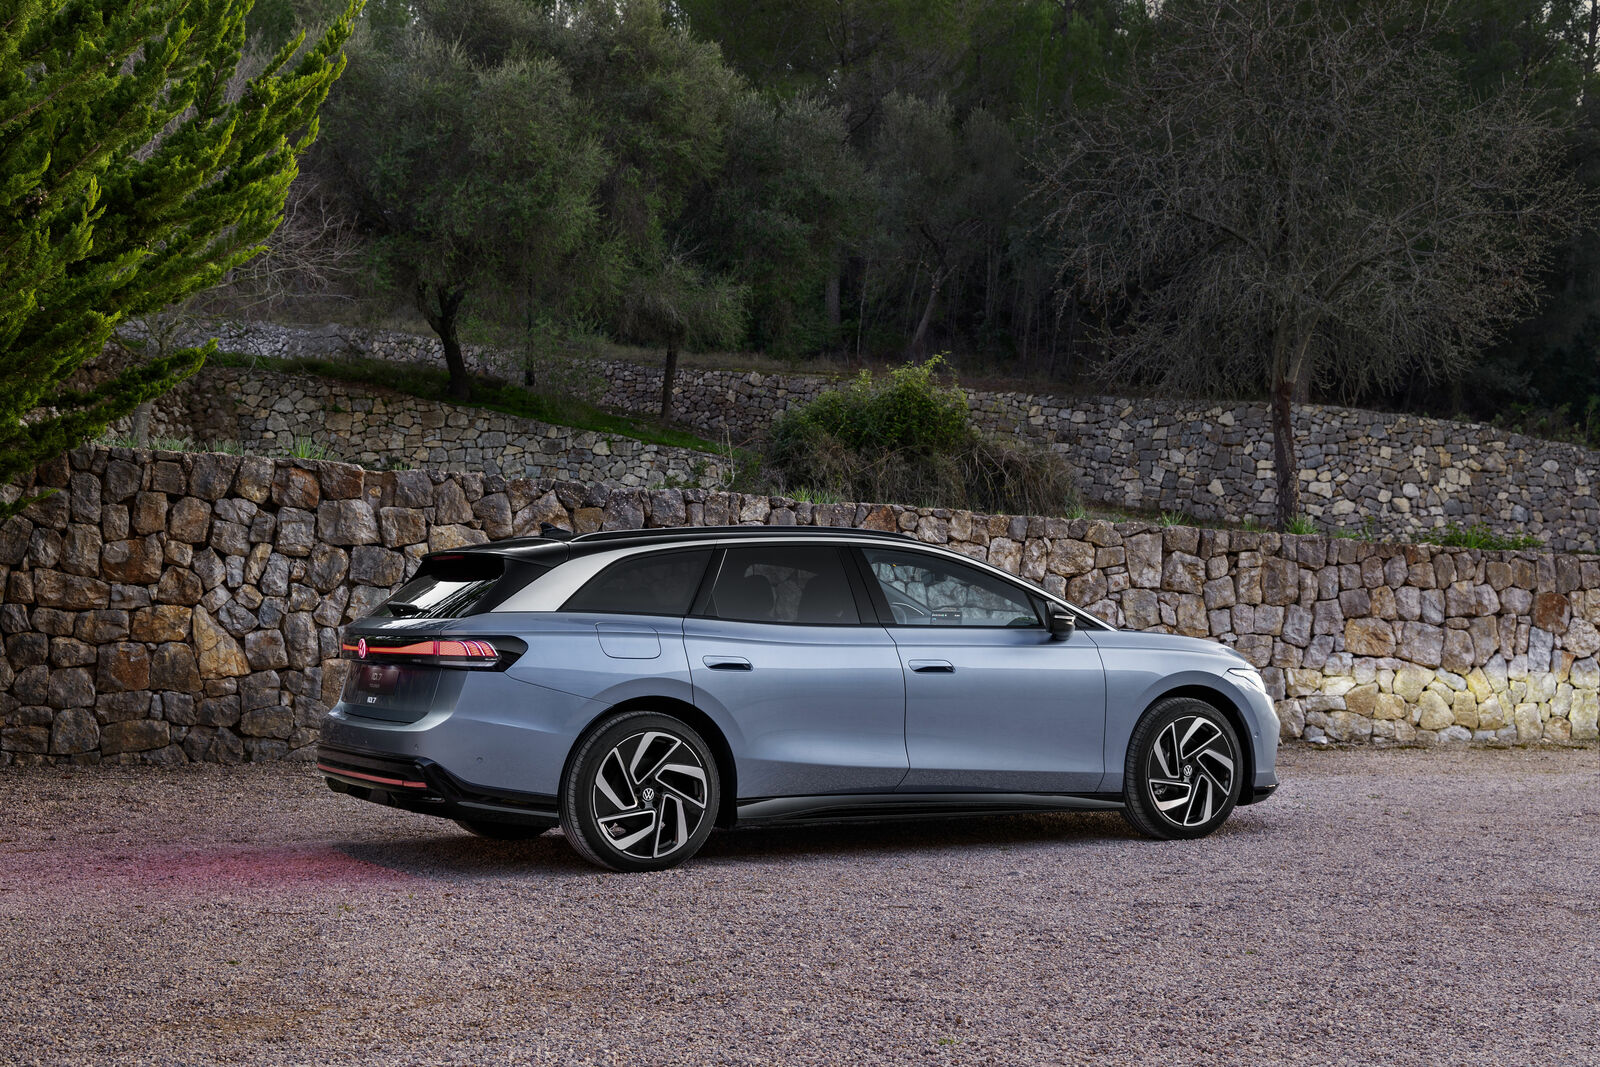 The all-electric Volkswagen ID.7 Tourer